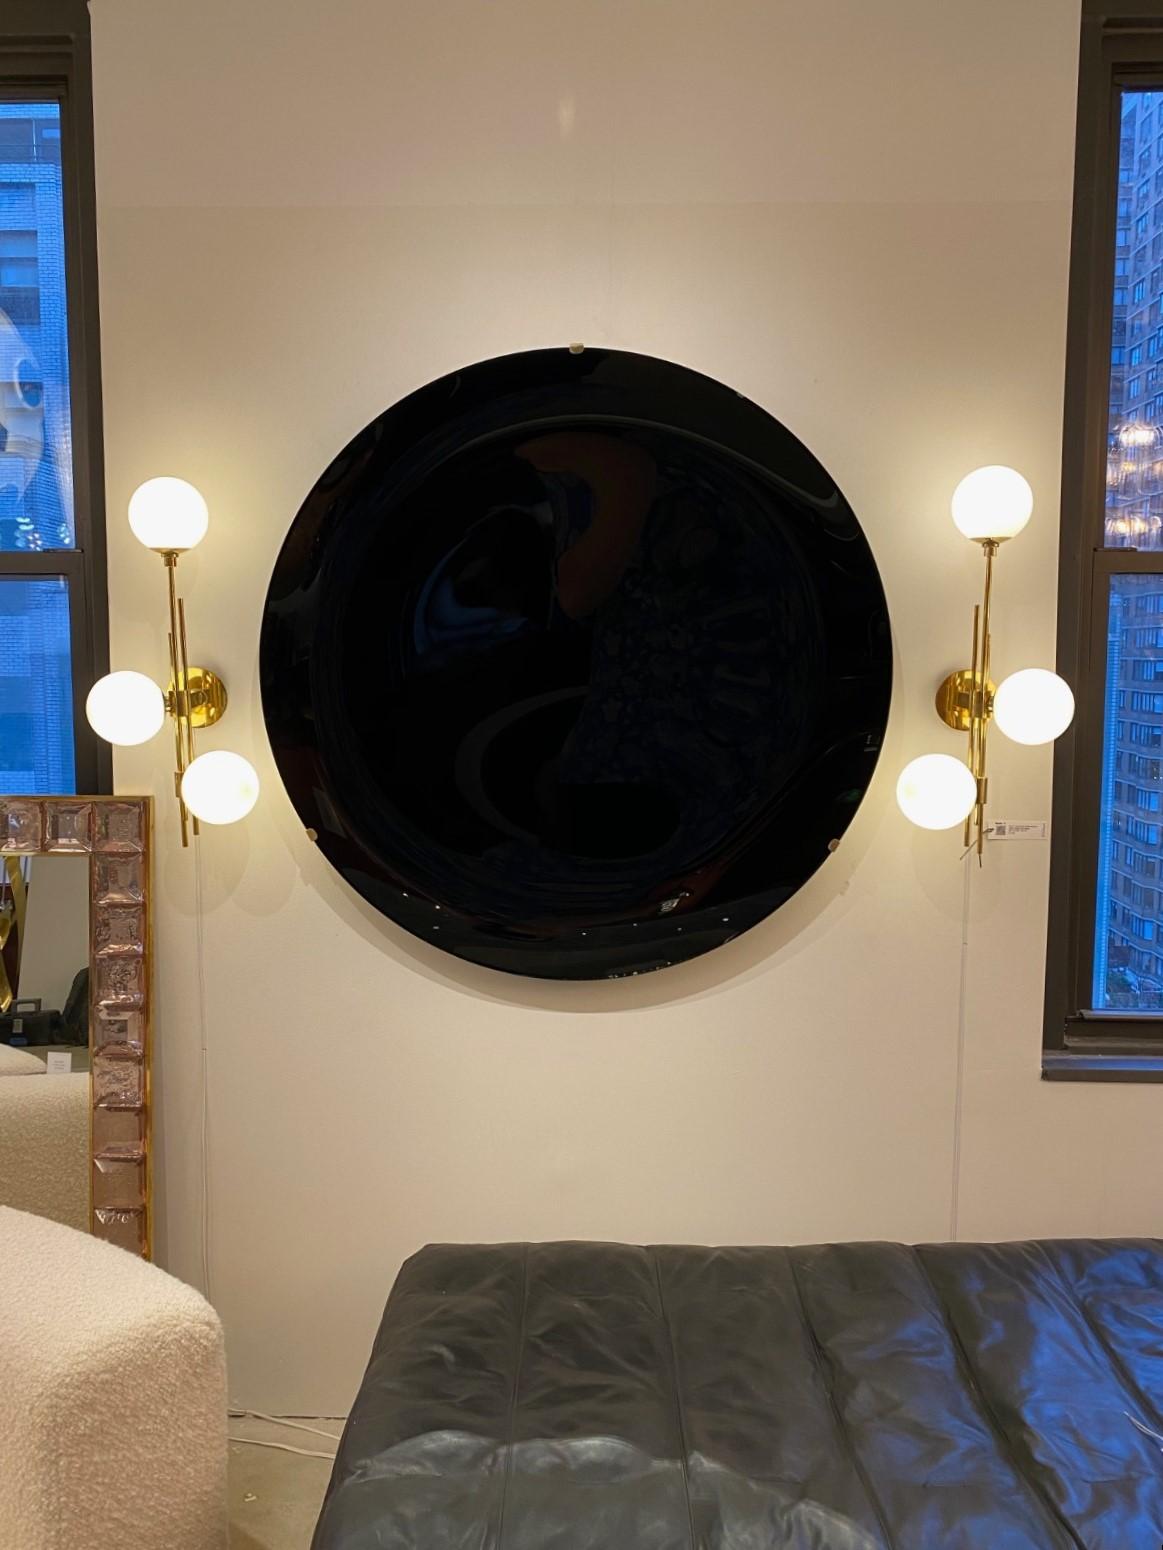 One of a kind, large sculptural round Black concave glass disc wall sculpture, Italy, 2023 reminiscent of an Andy Warhol pop art sculpture. Large round tinted glass in a dramatic Black hue, thermoformed into a sculptural concave form. Mounted on a